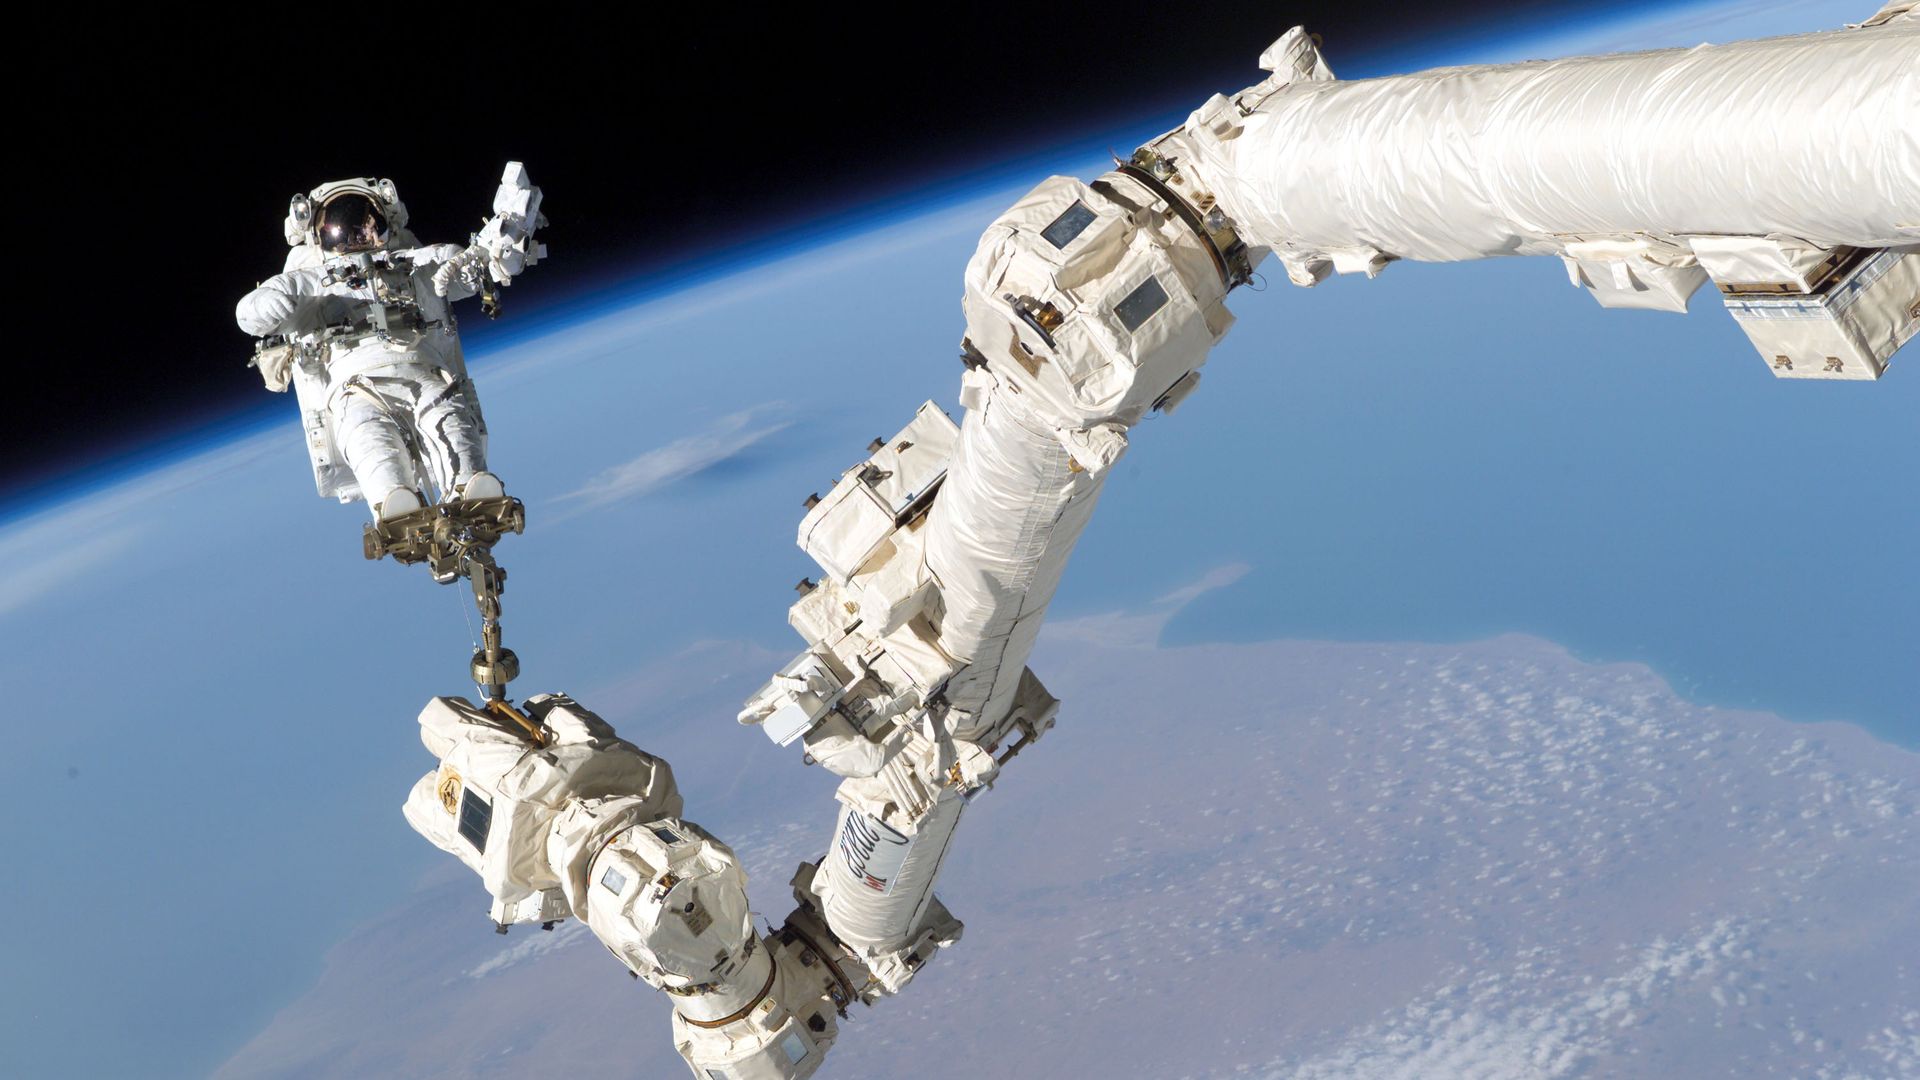 NASA astronaut Stephen K. Robinson anchored to the International Space Station's robotic arm during a spacewalk in August 2005.